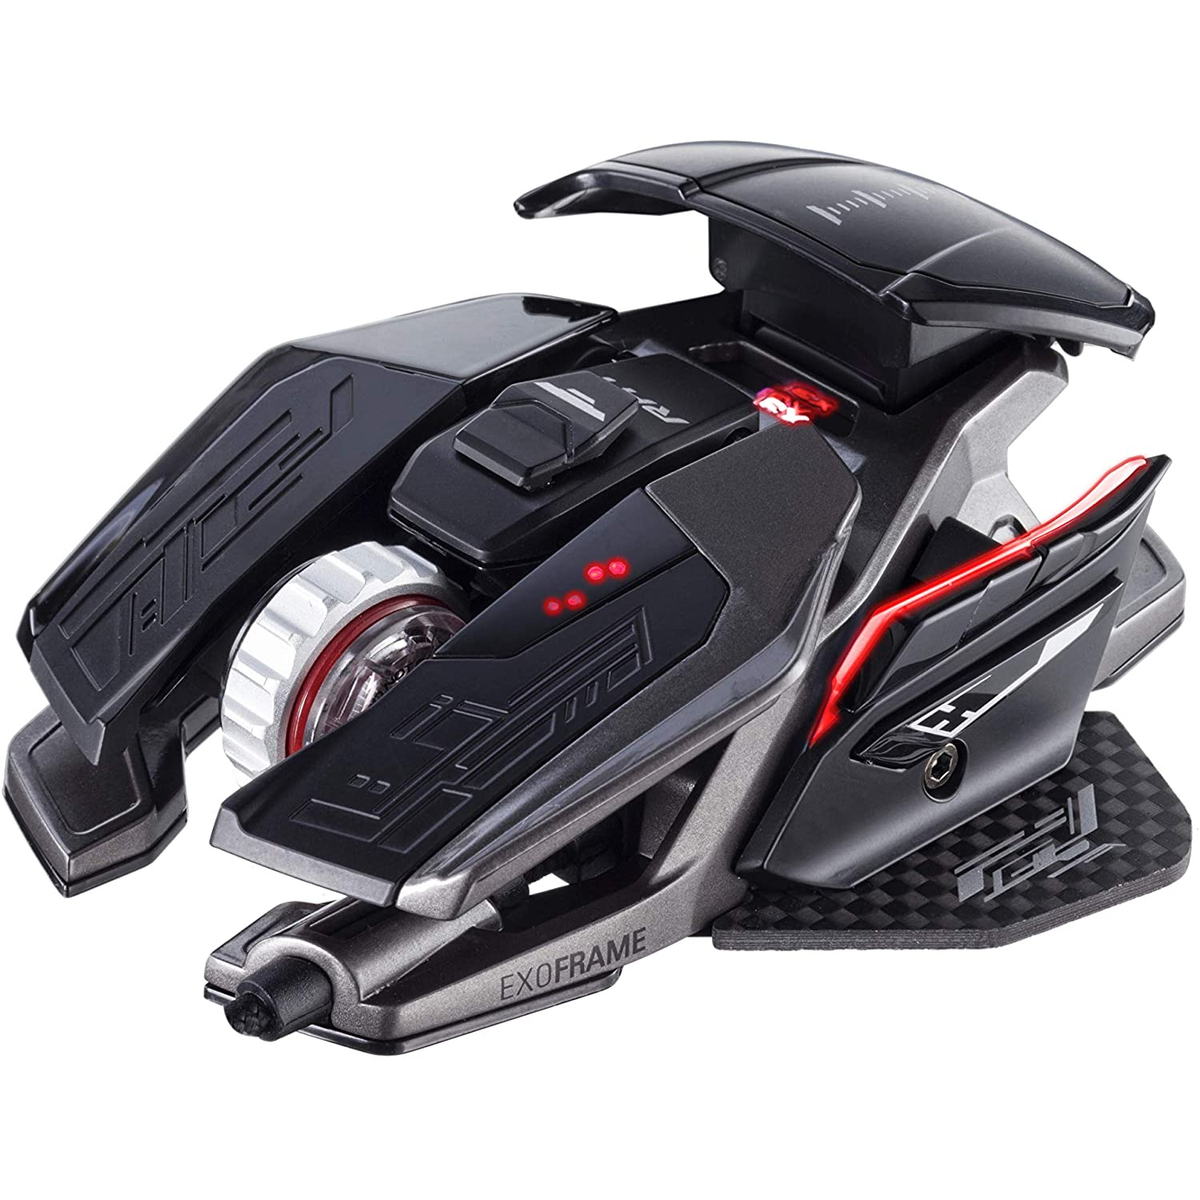 MAD CATZ MOUSE black Maus, HIGH BL MR05DCINBL001-0 PERFORMANCE GAM. X3 Gaming